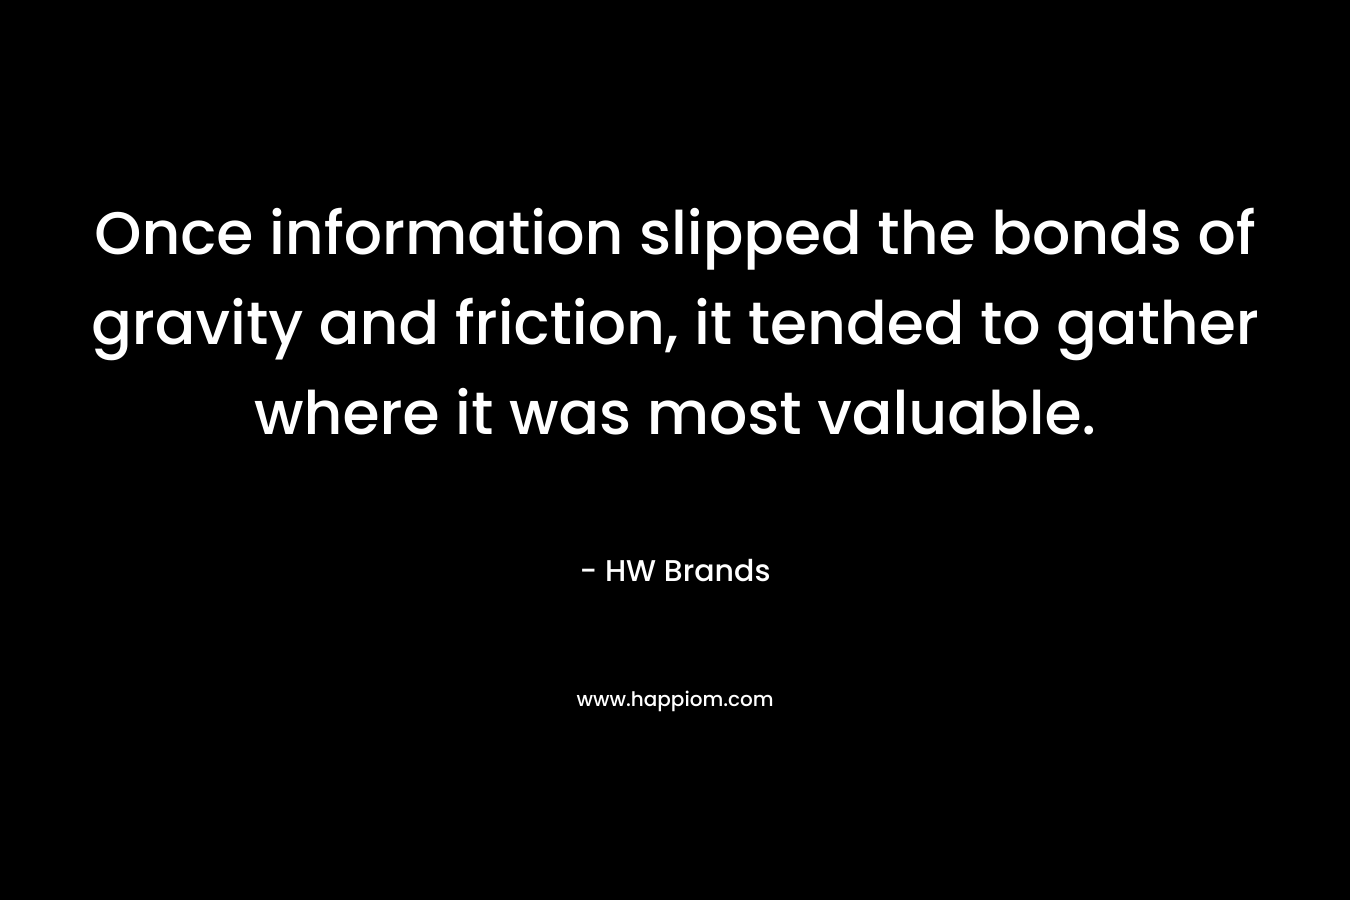 Once information slipped the bonds of gravity and friction, it tended to gather where it was most valuable.